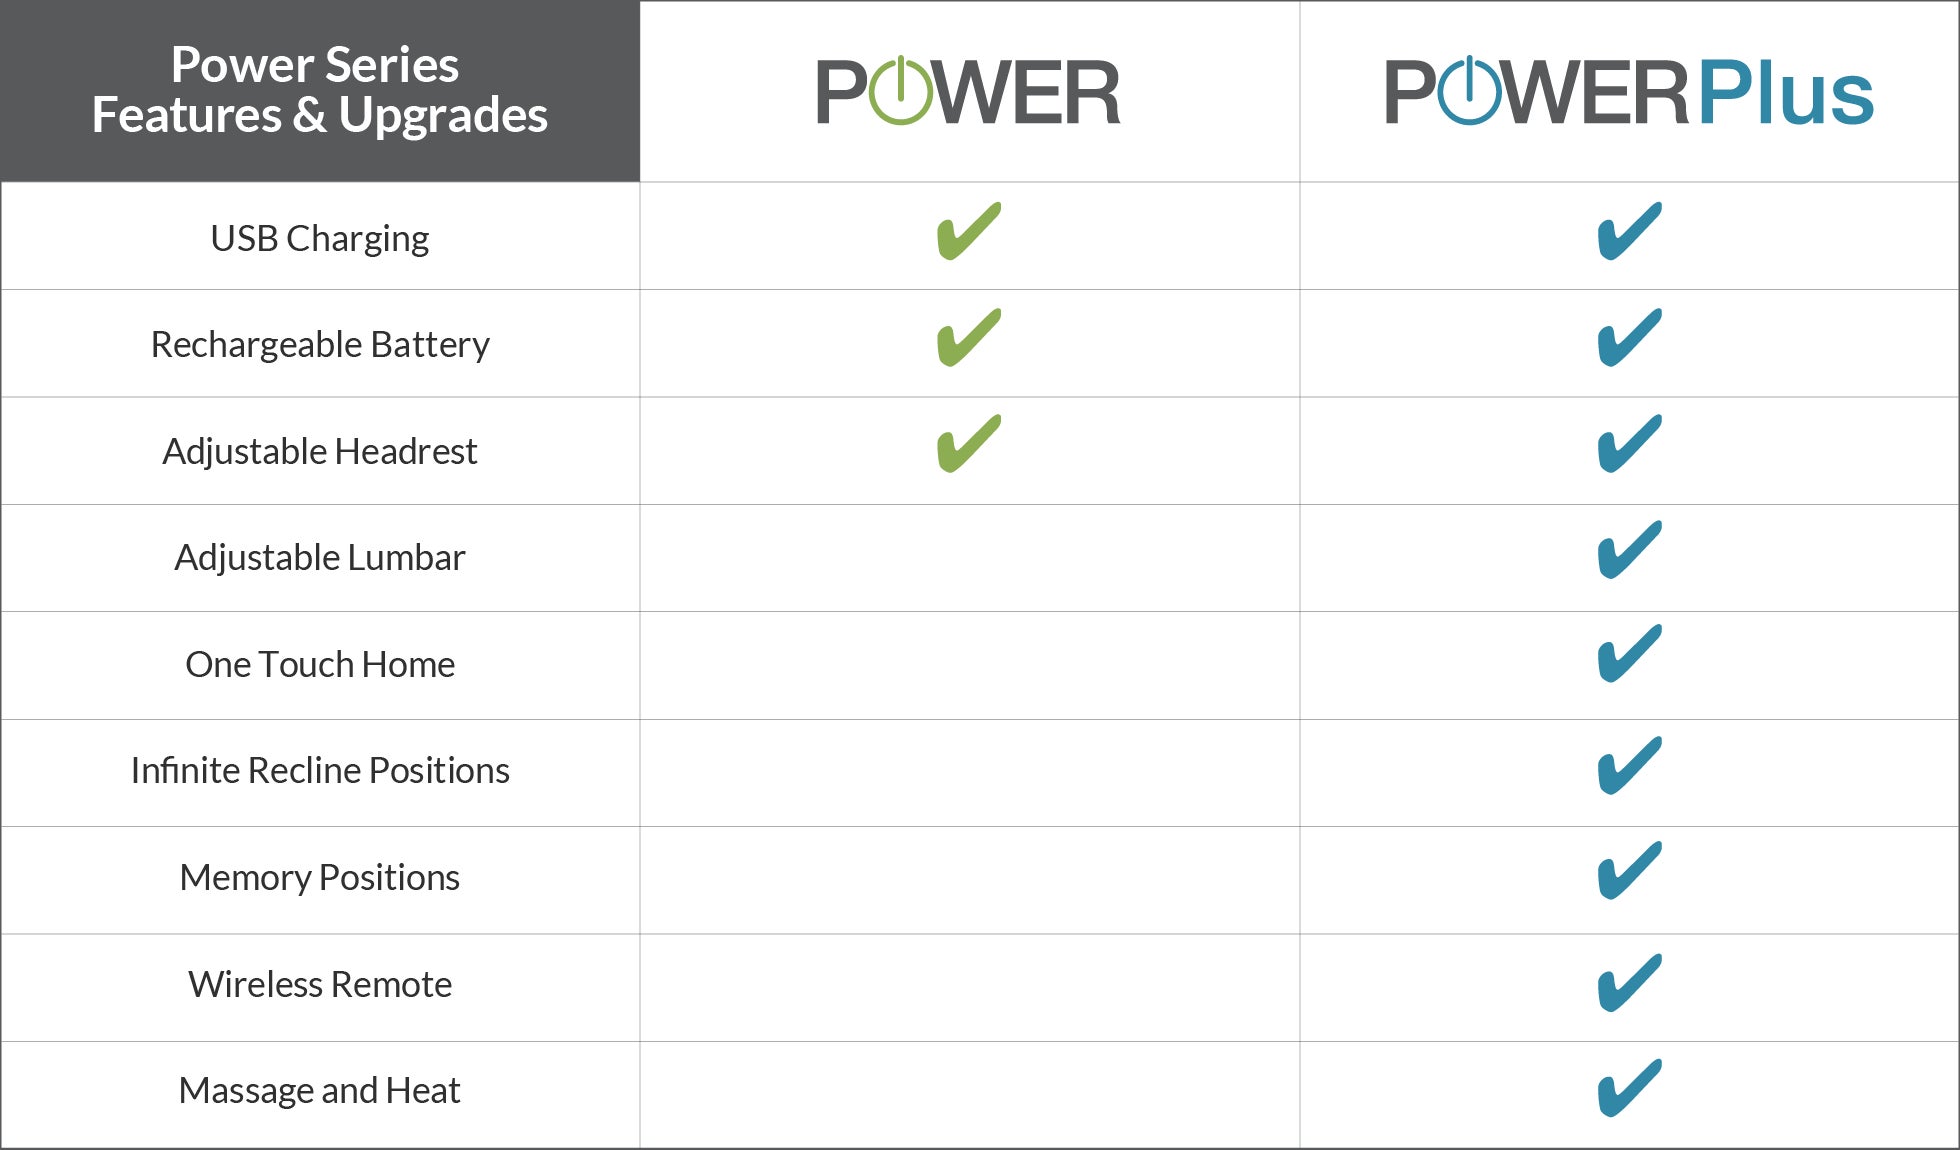 Chart comparing Power Series Features & Upgrades